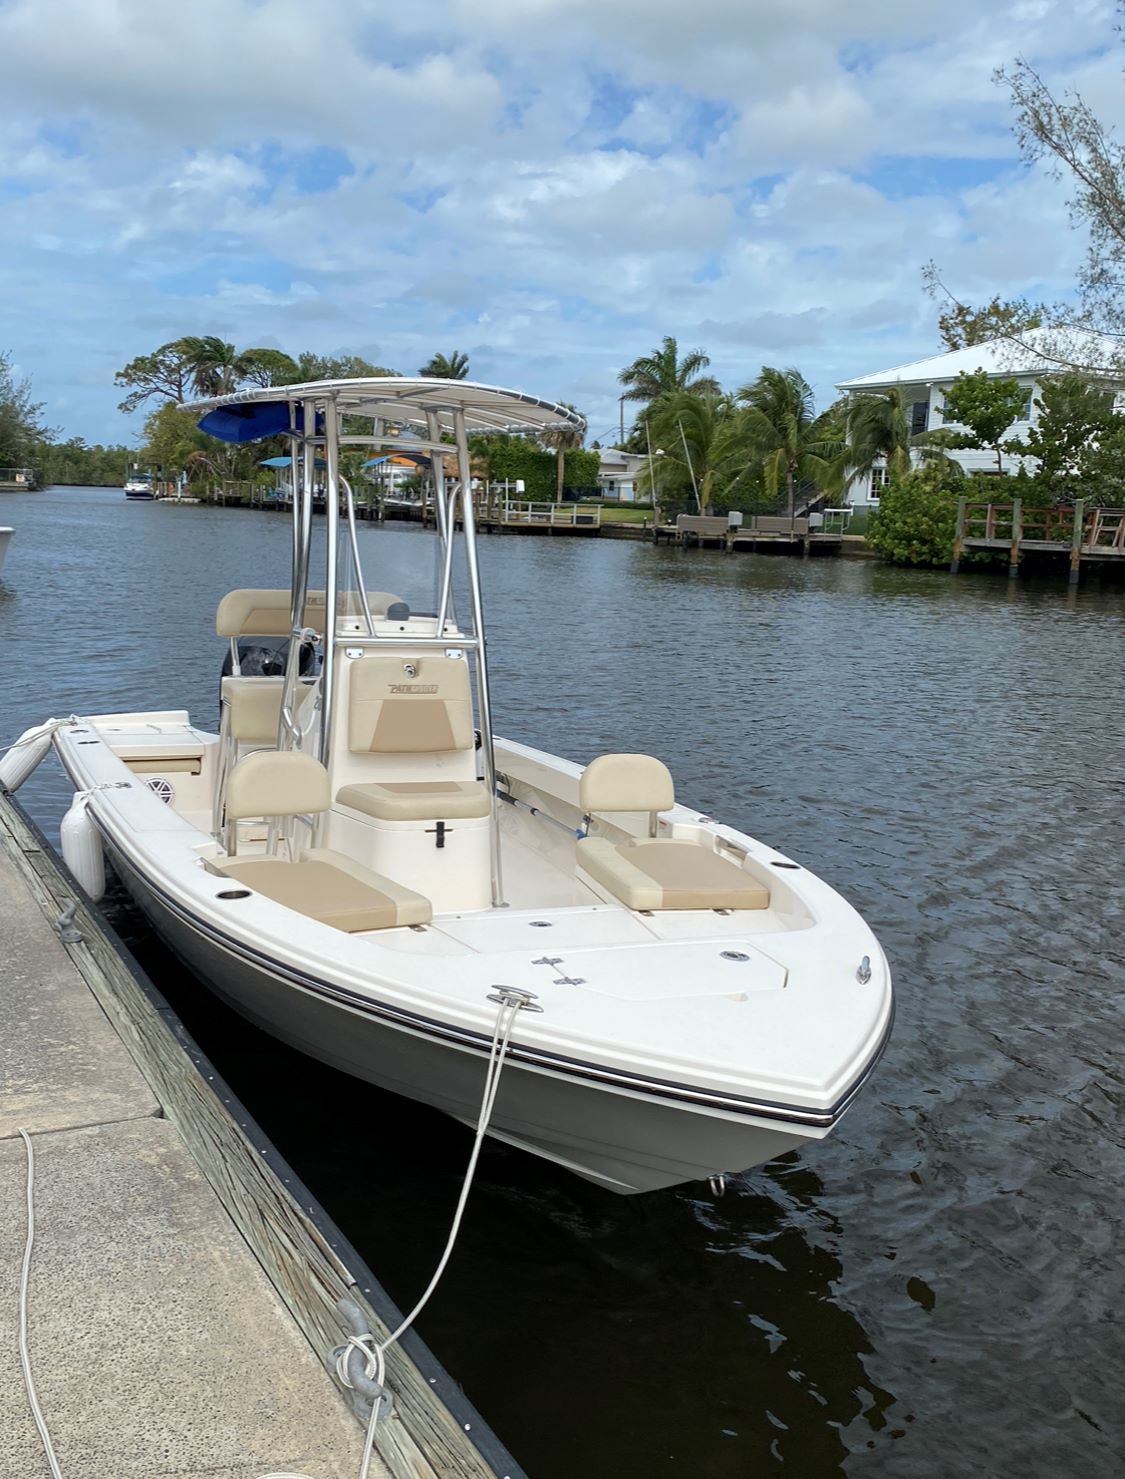 KNOT ON TIME (21FT Center Console Pathfinder 150 HP Fishing)